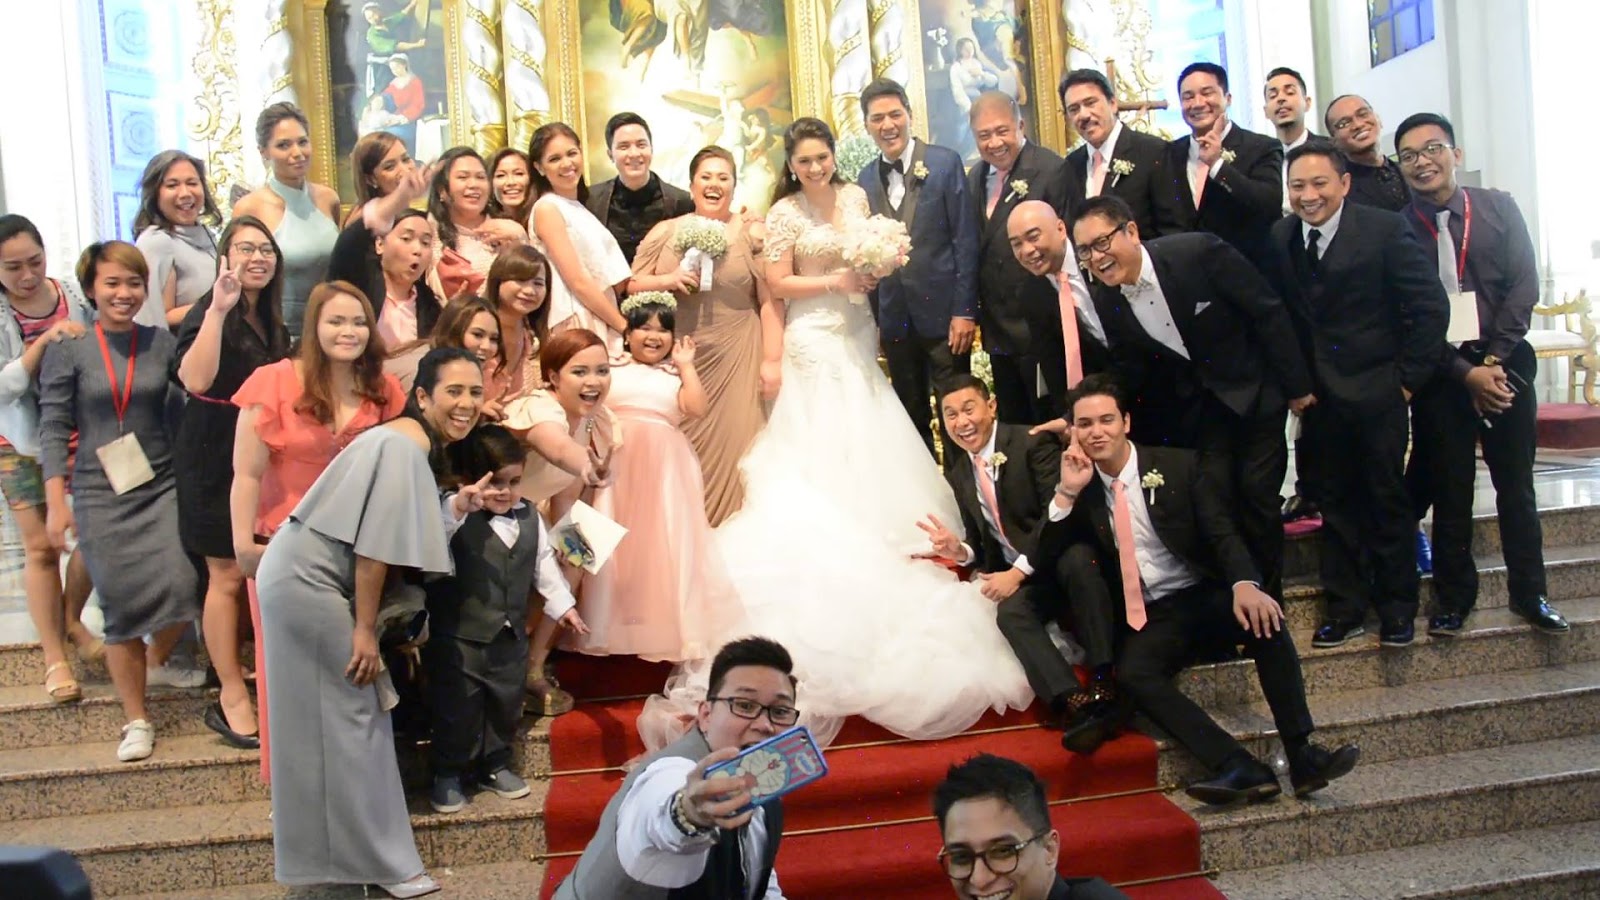 Wedding of Vic Sotto and Pauleen Luna, Full of Love, Laughter and Tears |  The News Bite